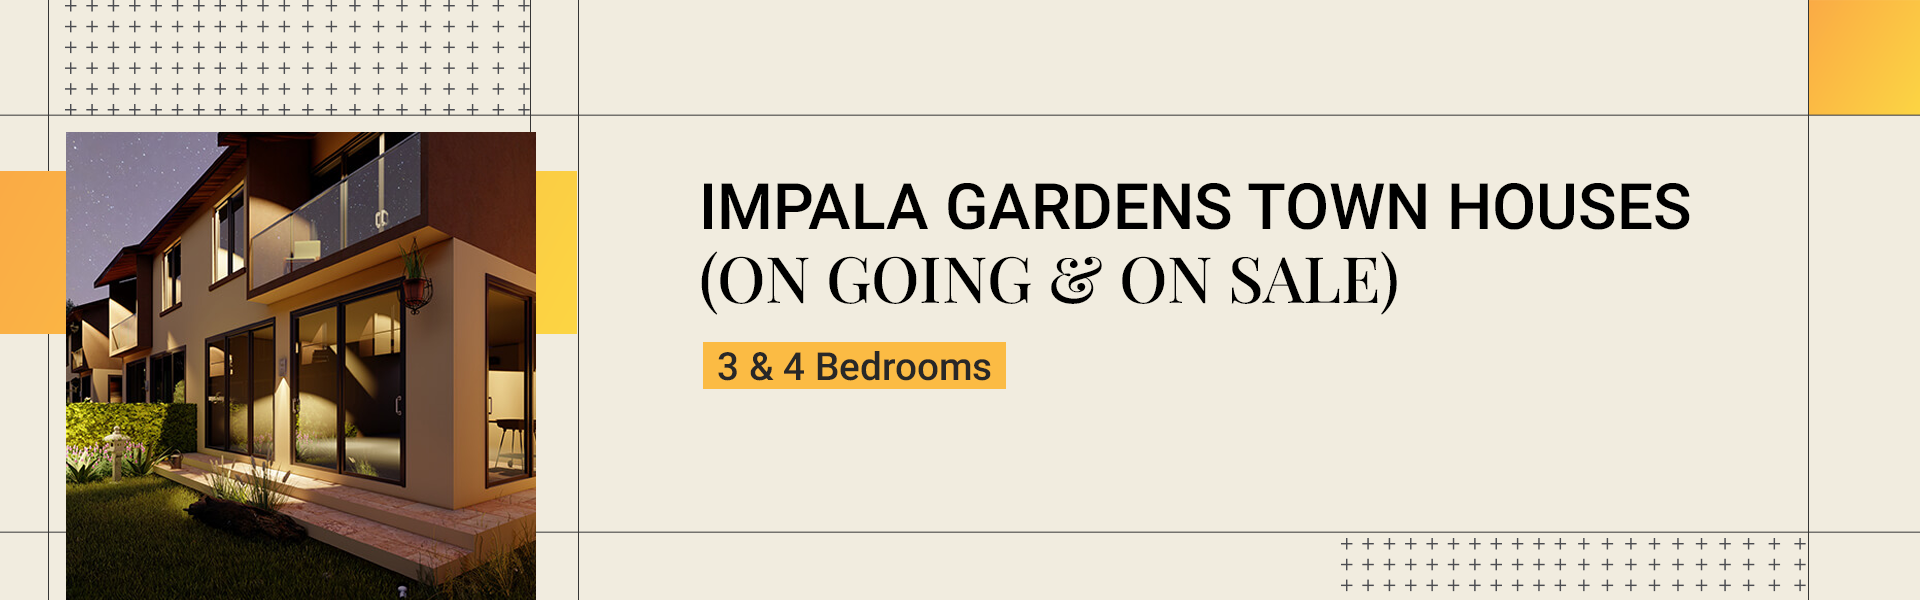 Impala Gardens Town Houses (On Going & On Sale)